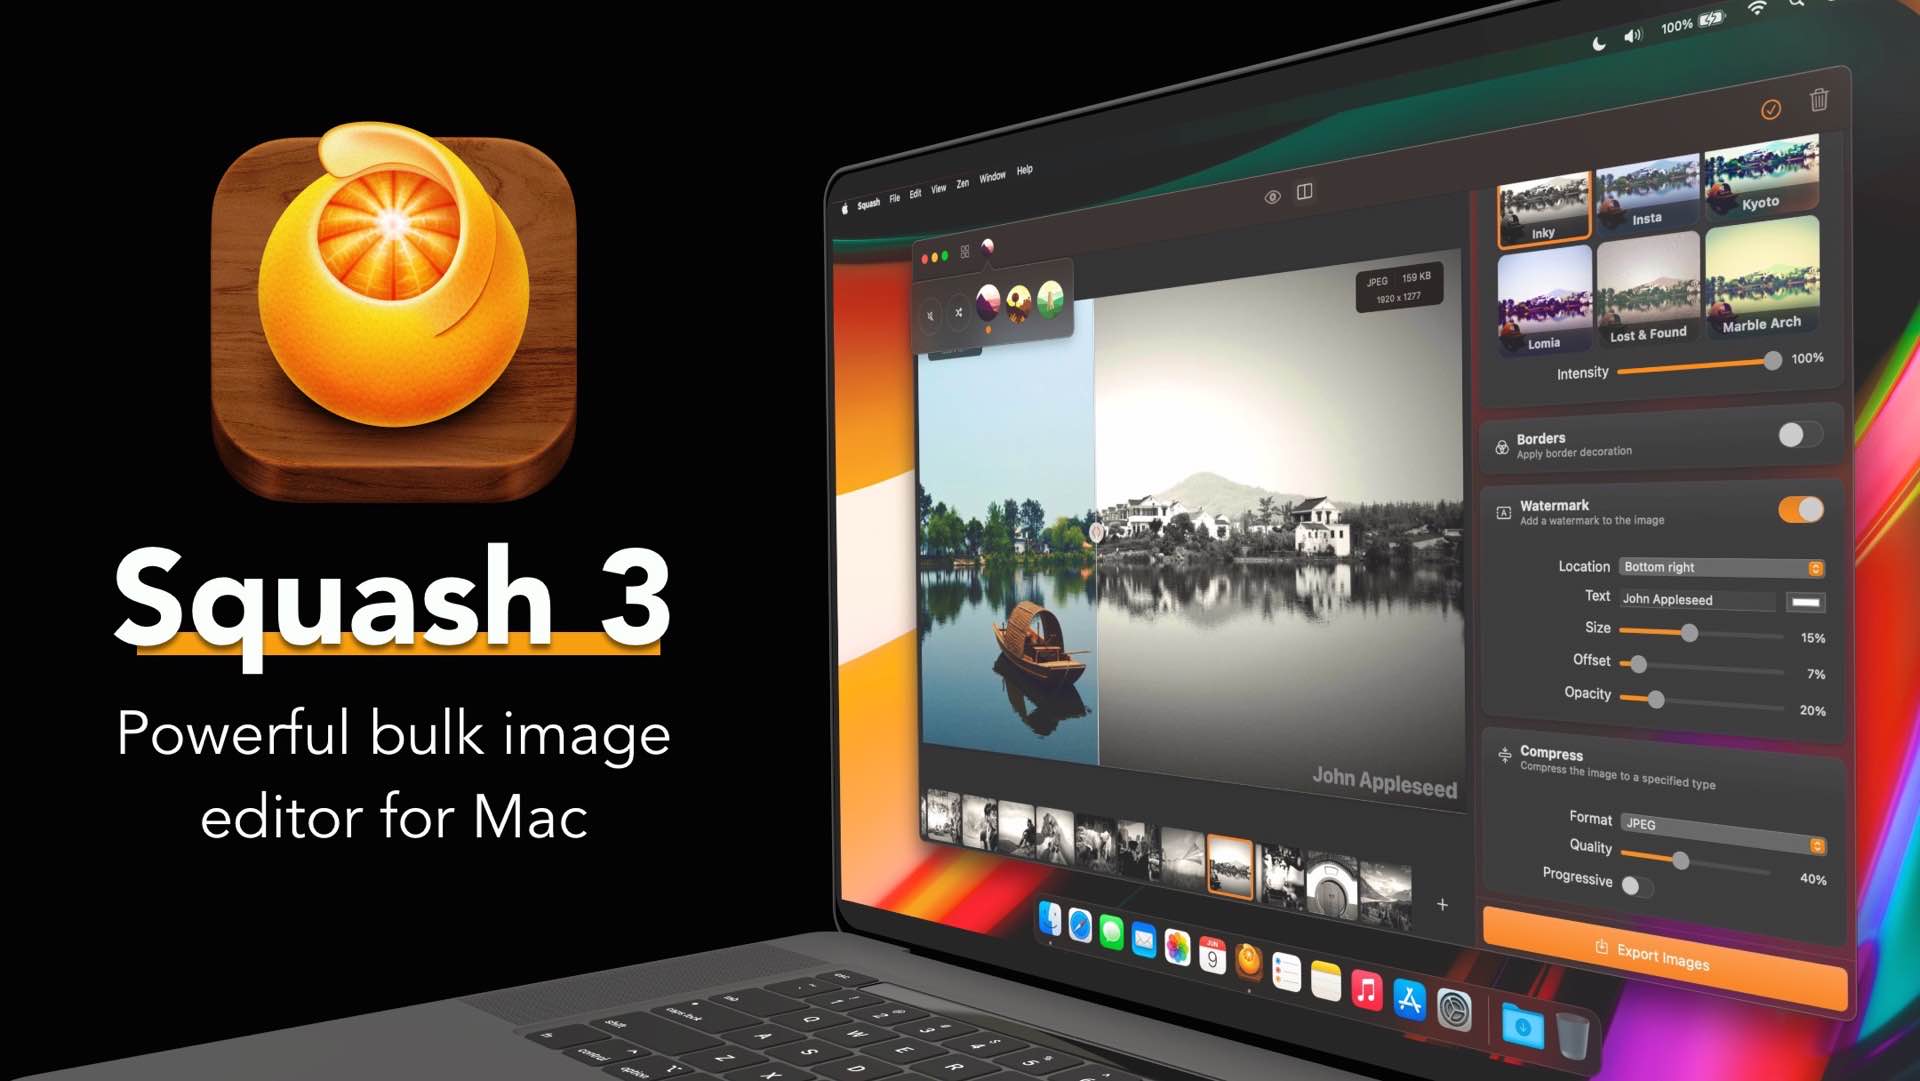 Realmac Software Releases Squash 3 Batch Image Editor for macOS